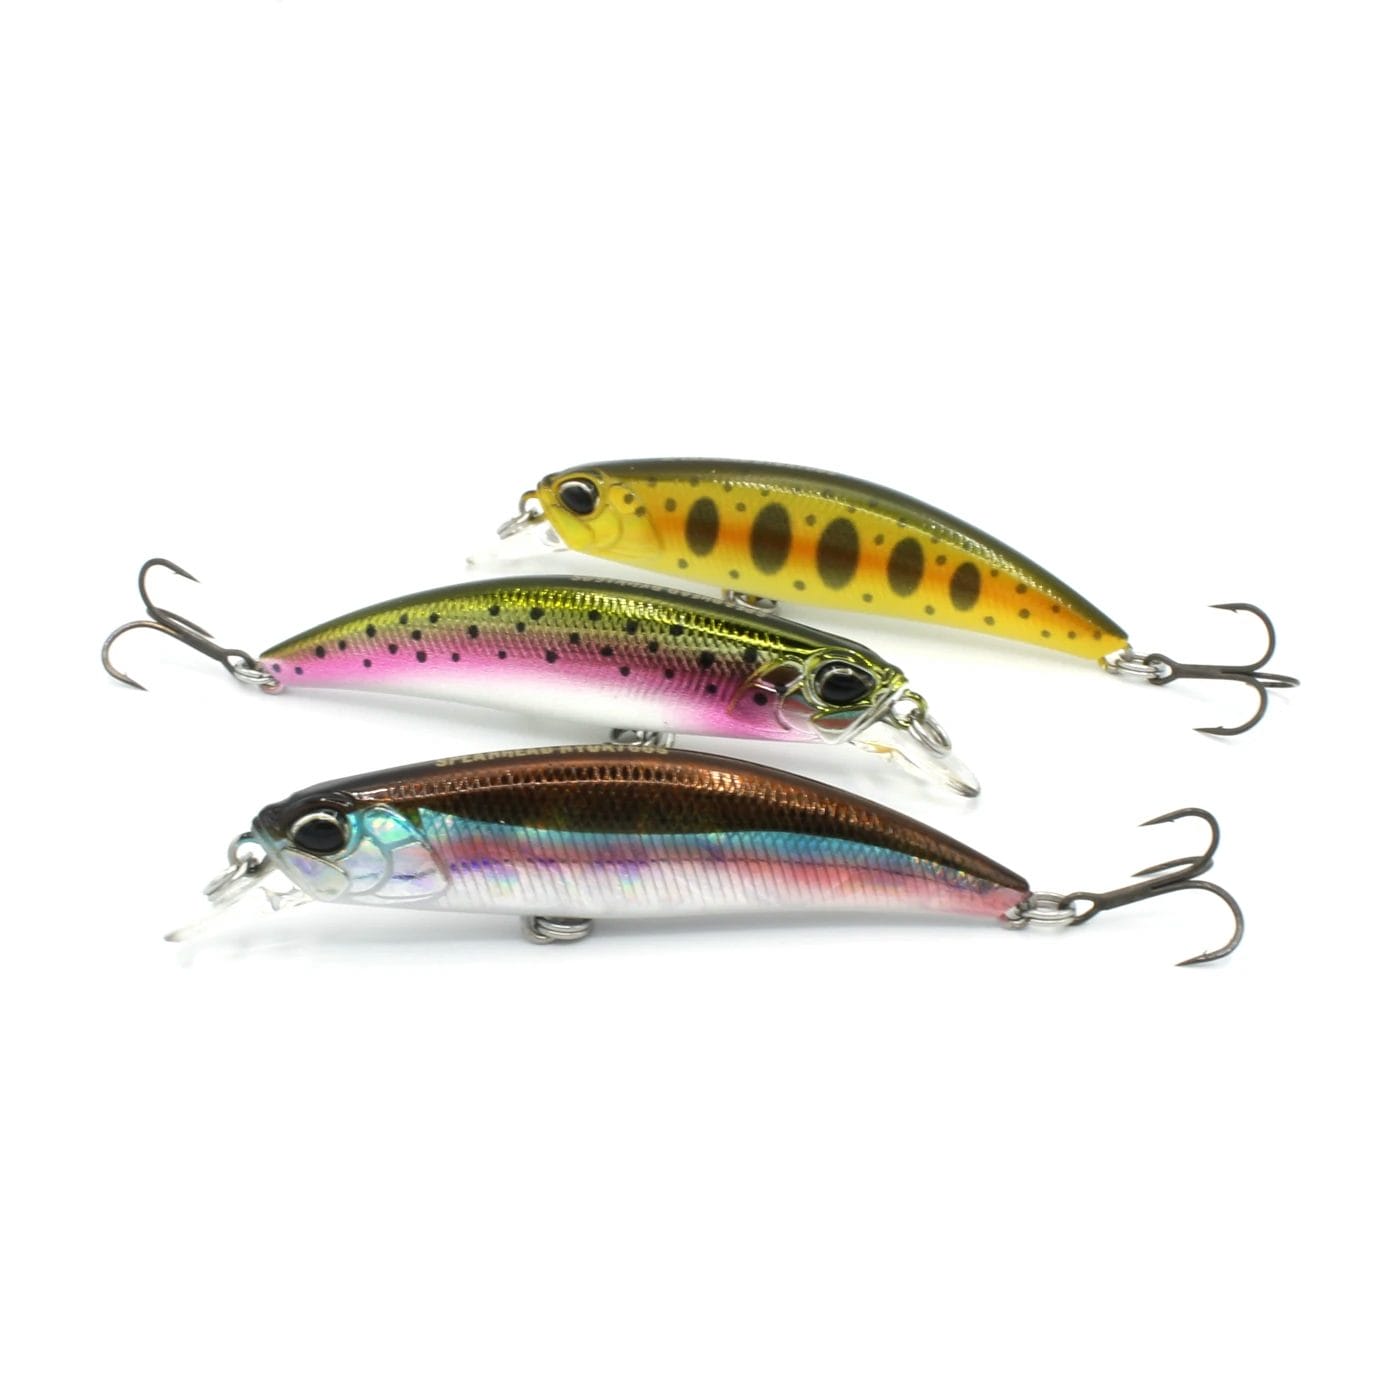 Huerco pack rod container 60 - 【Bass Trout Salt lure fishing web